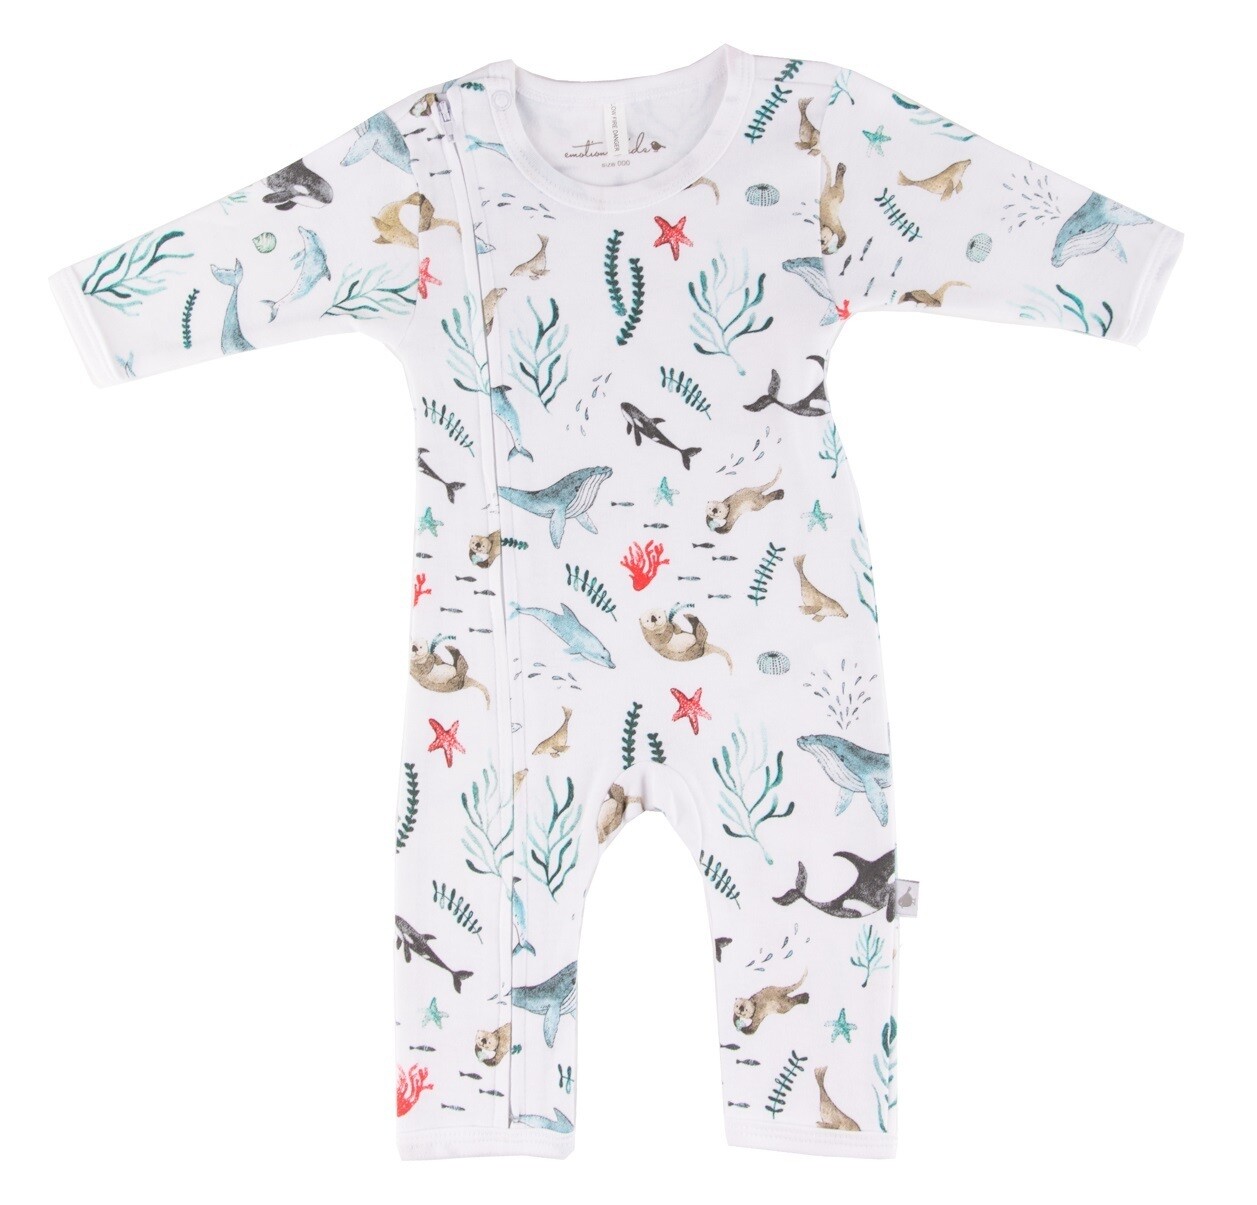 EMOTION & KIDS
- Romper Outfit With Zip -Under The Sea(3-6 months)